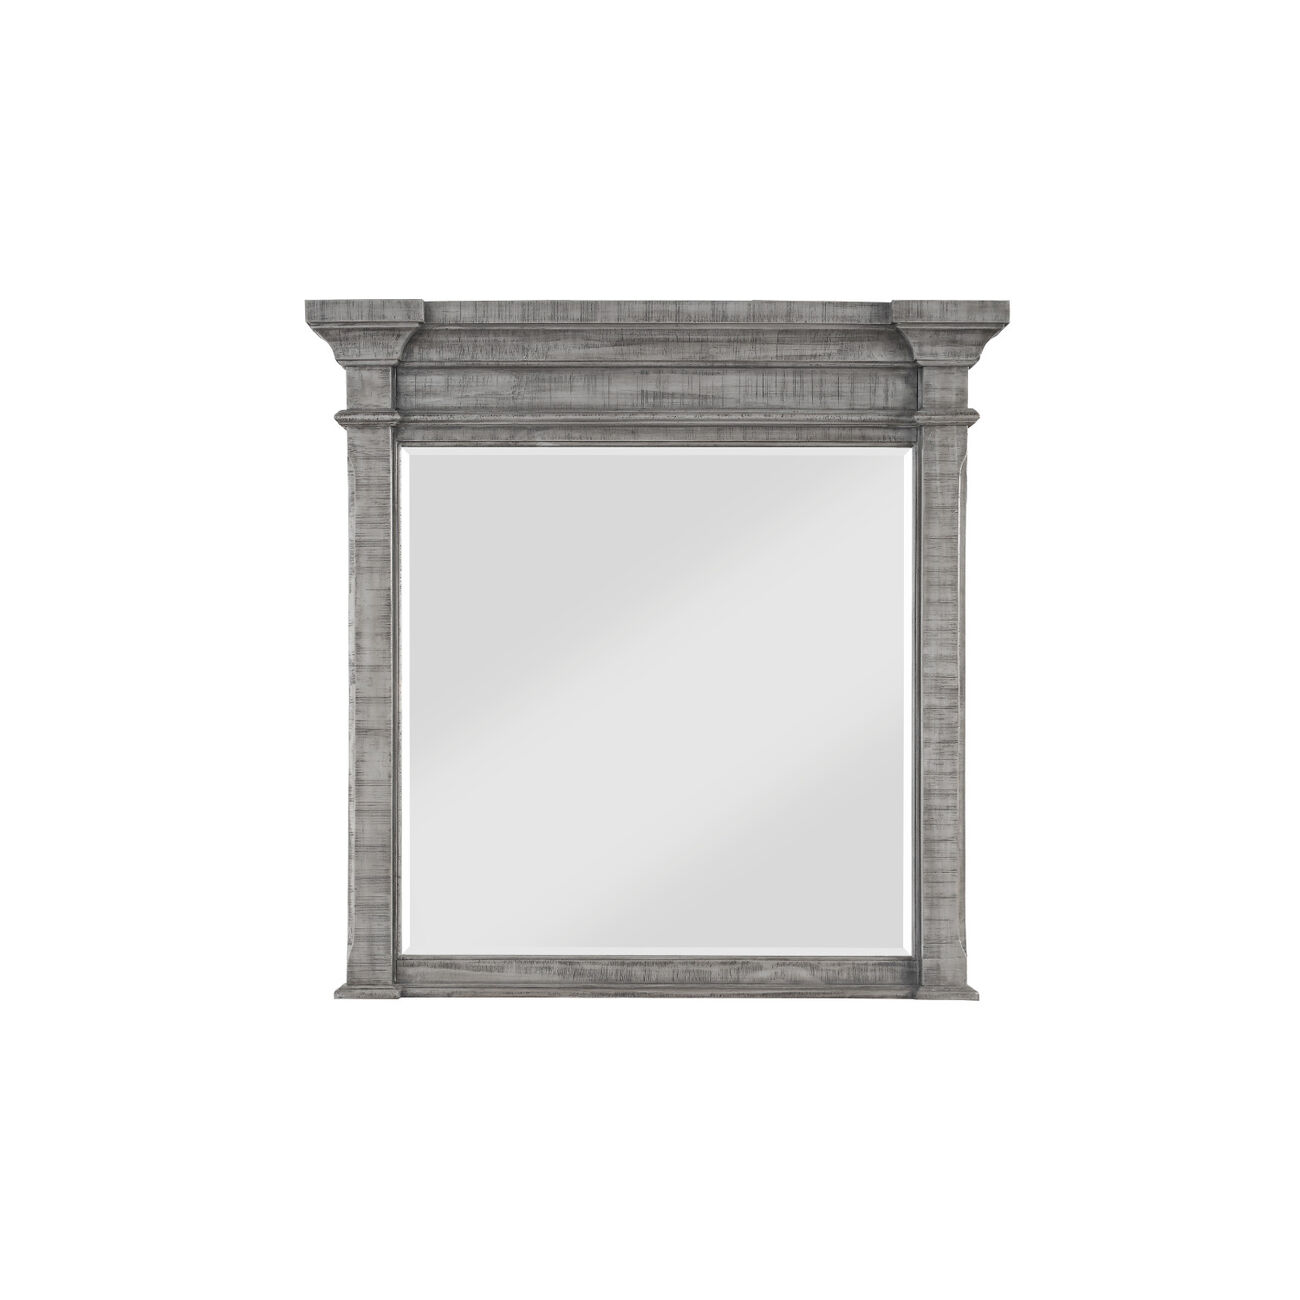 Wooden Frame Square Mirror with Tapered Moldings, Gray